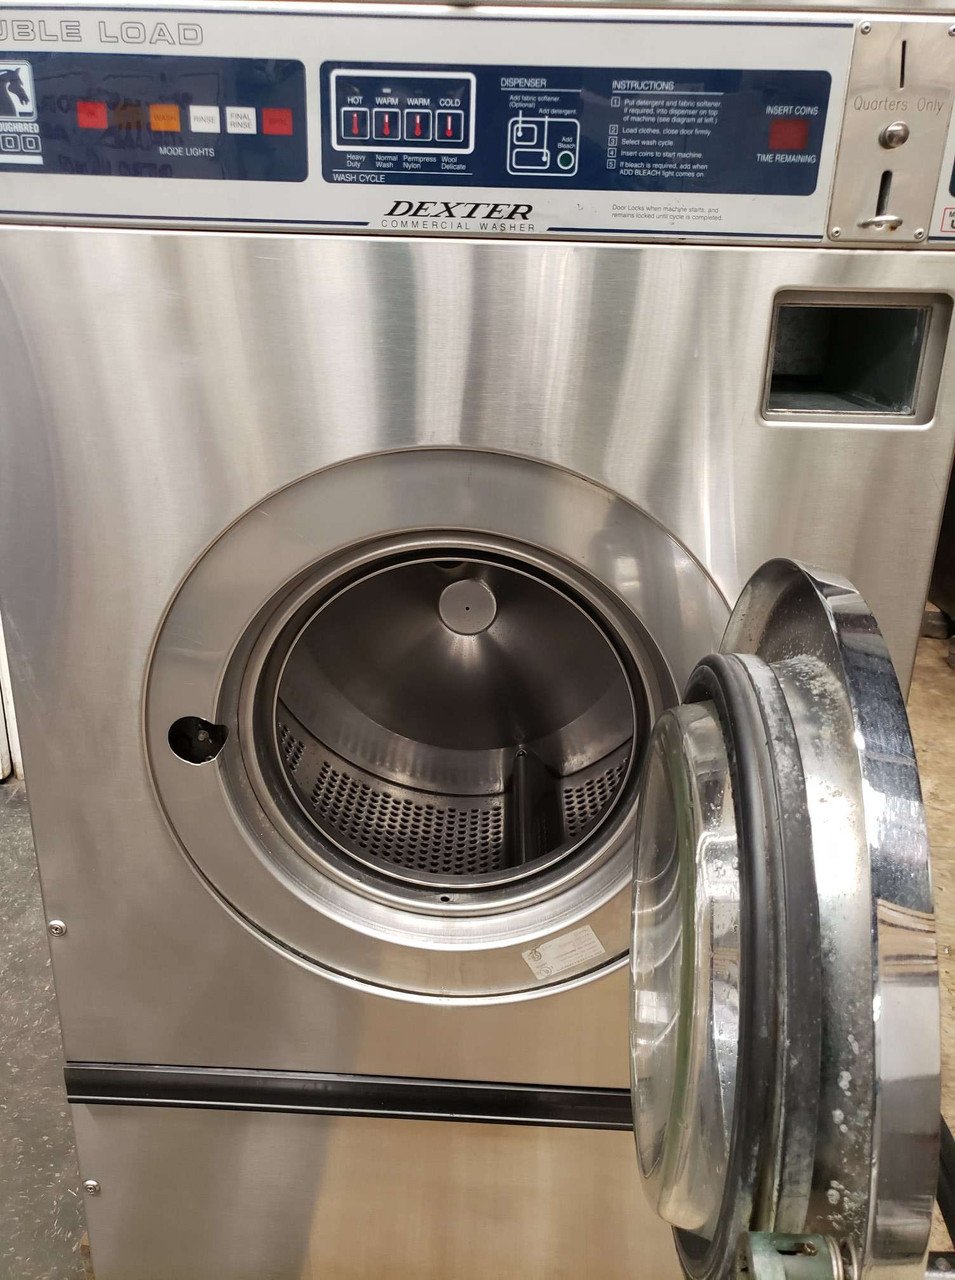 DEXTER T300 COMMERCIAL FRONT LOAD WASHING MACHINE, 18 LBS CAPACITY MODEL:  WCN18AASS SERIAL NO: 20009000436411